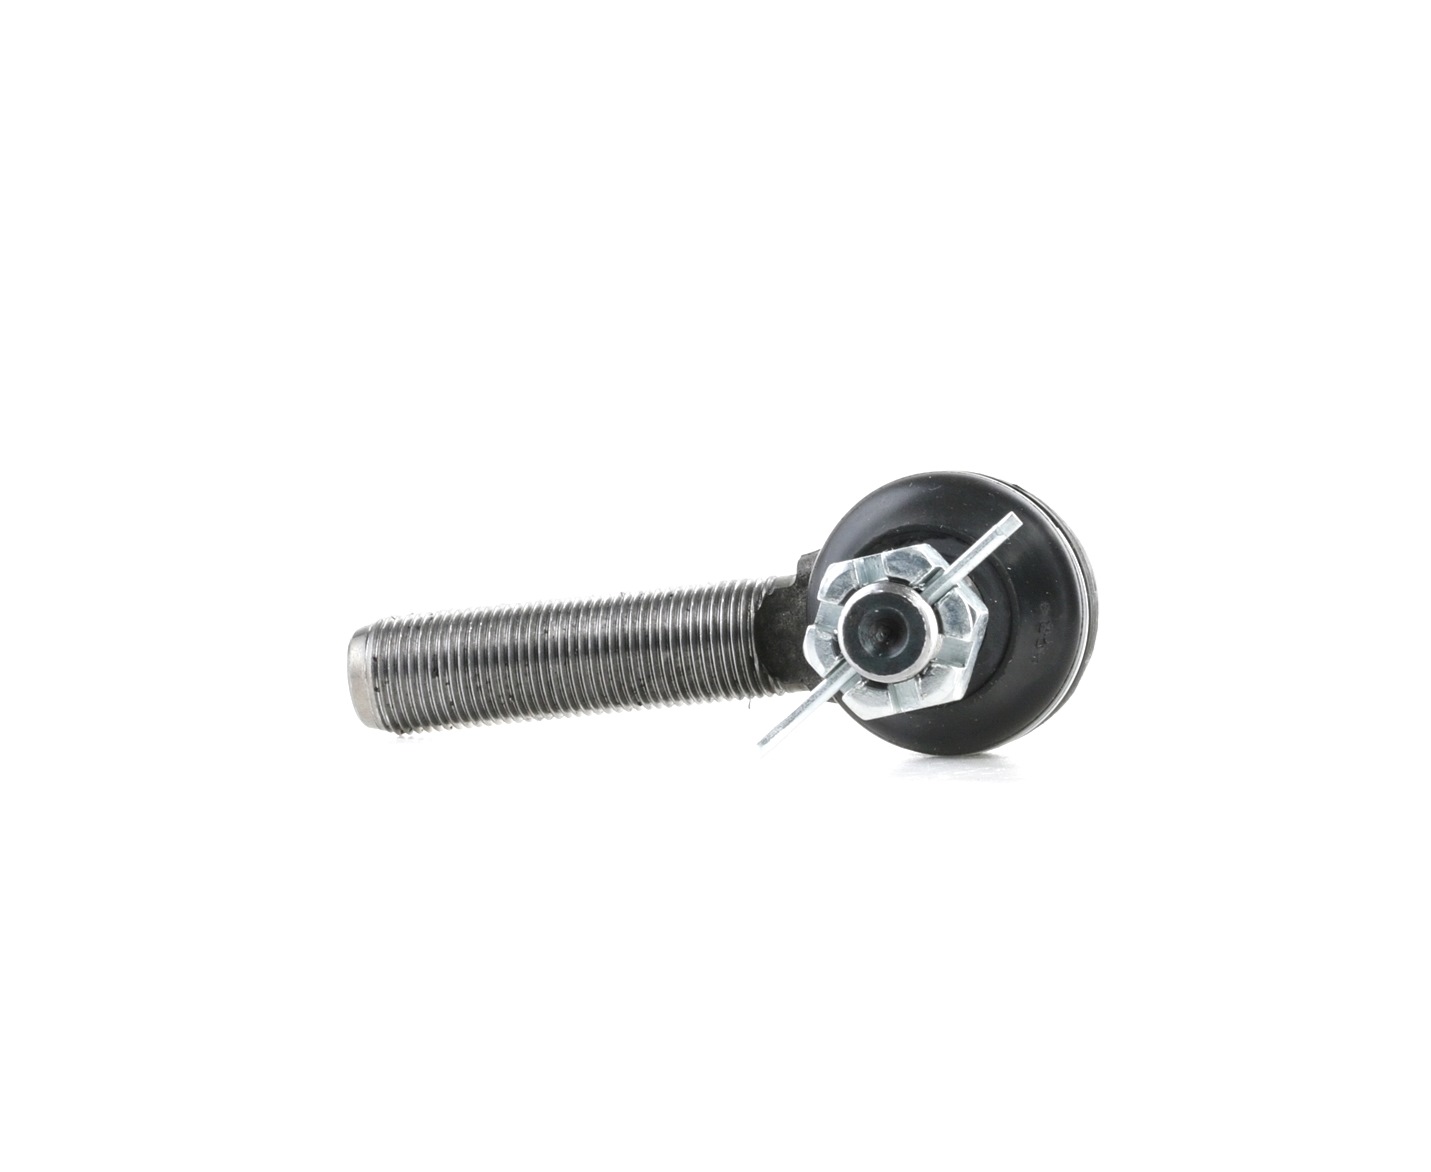 STARK SKTE-0280471 Track rod end Cone Size 16,4 mm, M14 x 1,5, M18 x 1,50 RHT M mm, Front Axle, Left, outer